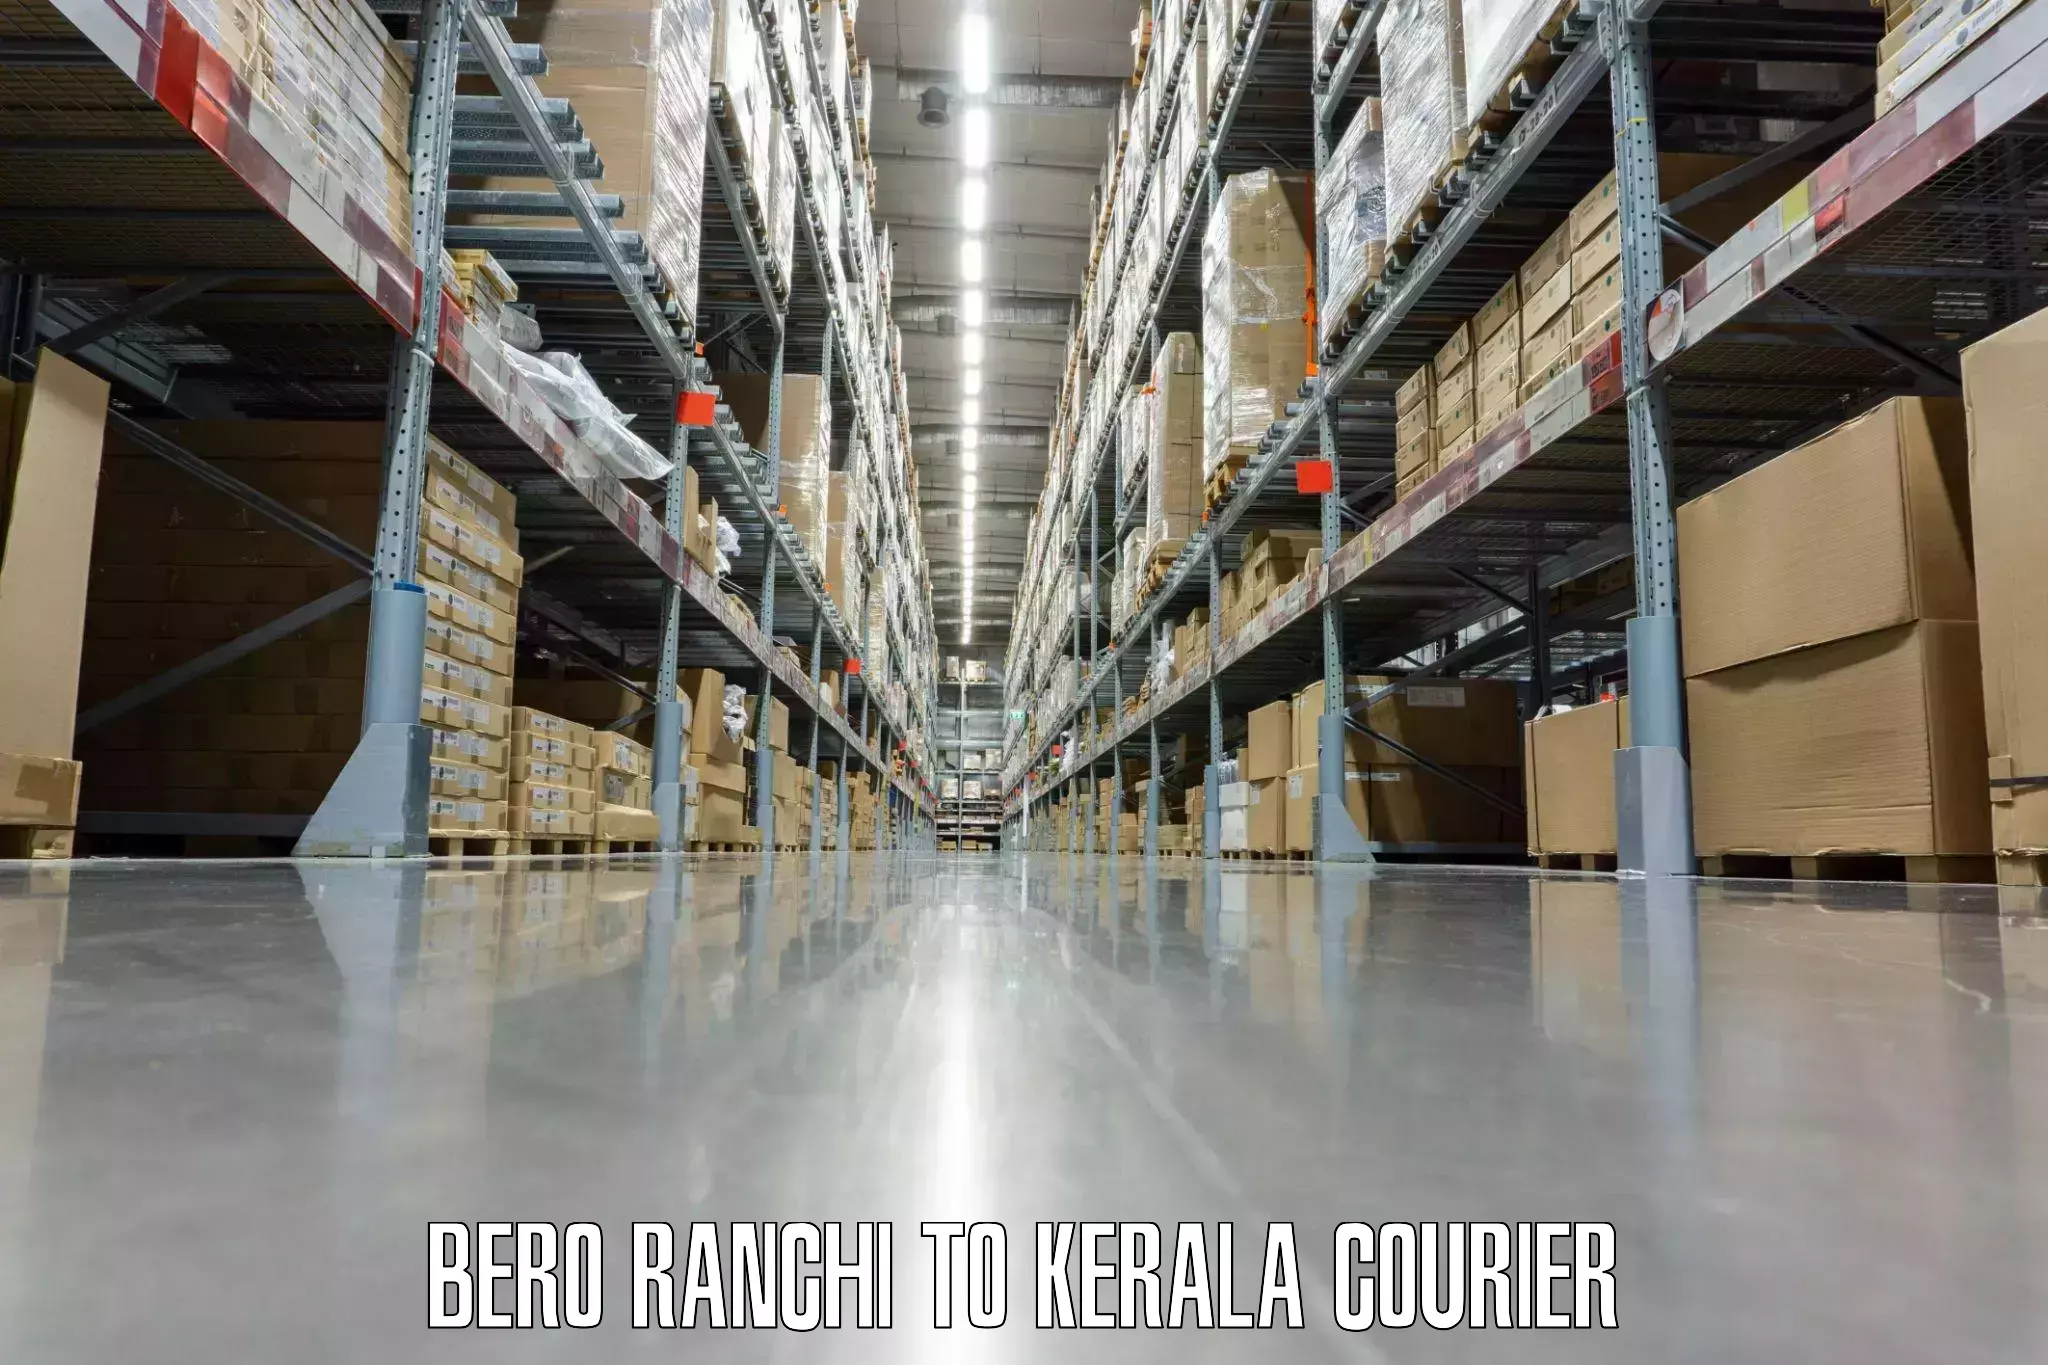 Baggage delivery scheduling Bero Ranchi to Kerala